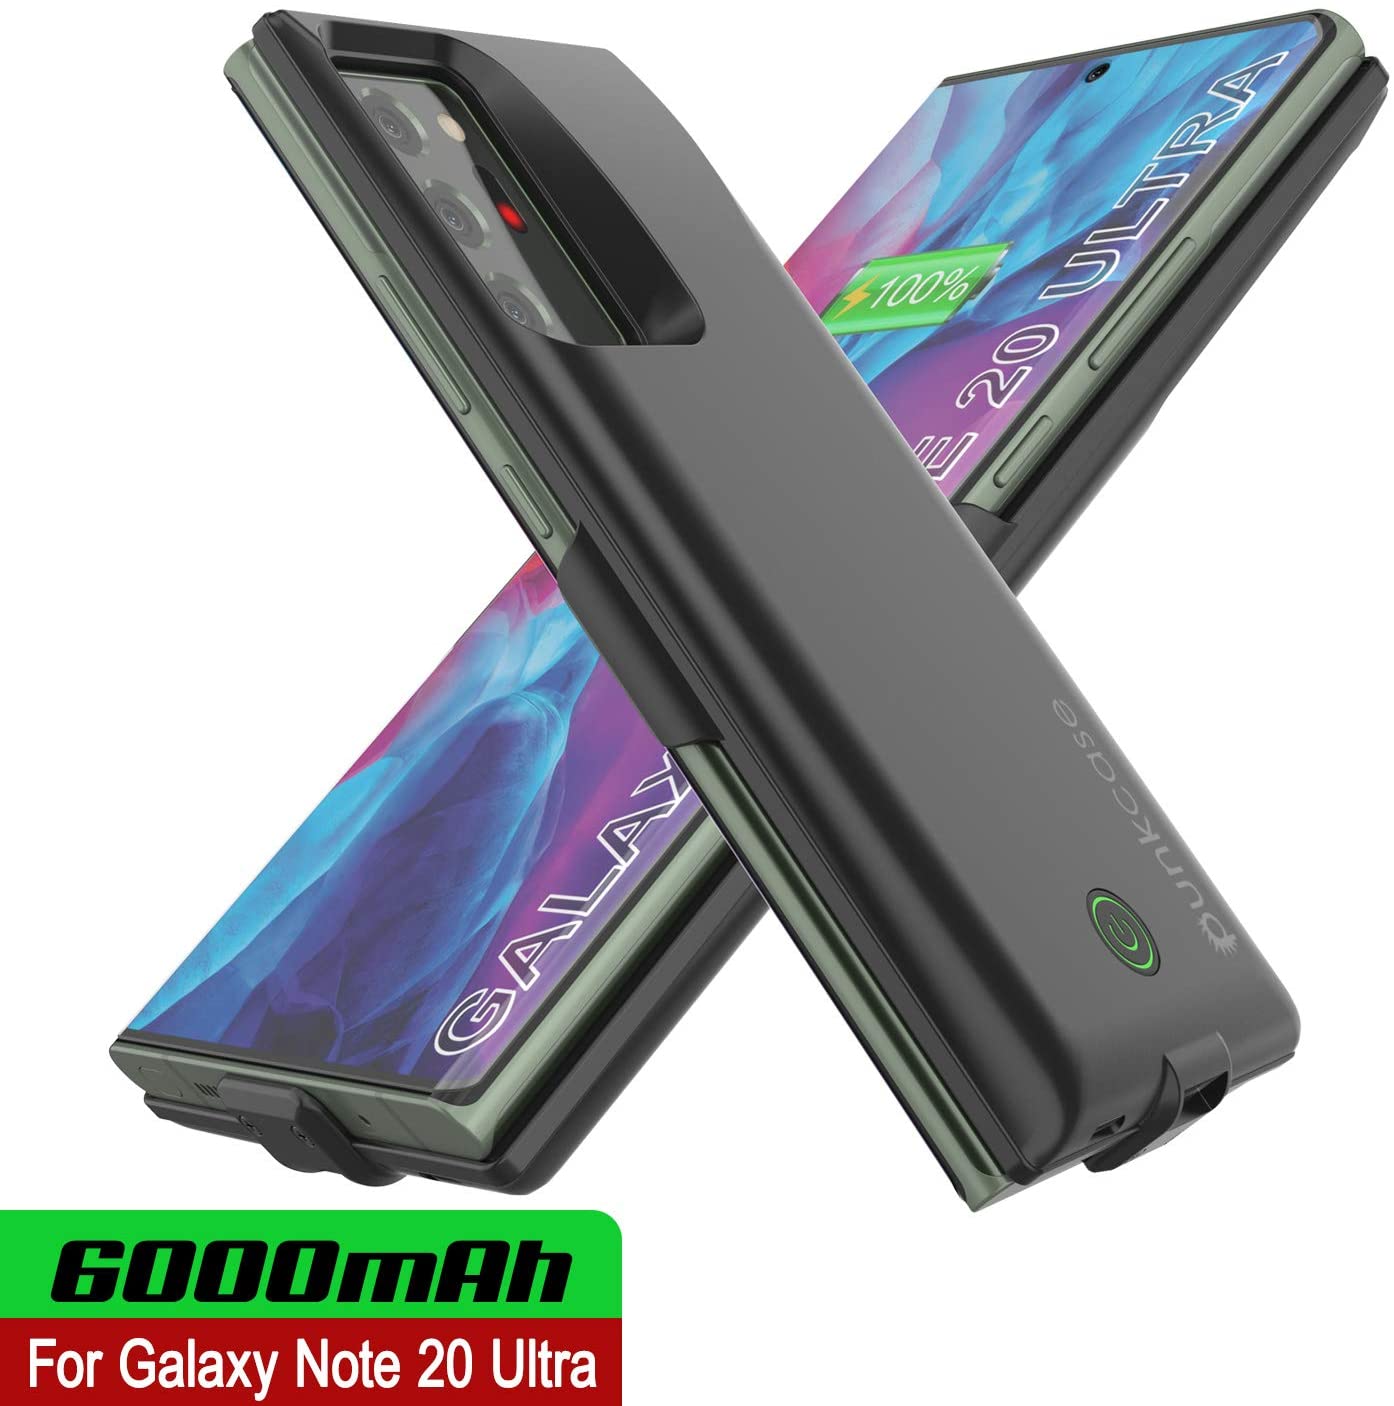 Galaxy Note 20 Ultra 6000mAH Battery Charger Slim Case [Black] – punkcase